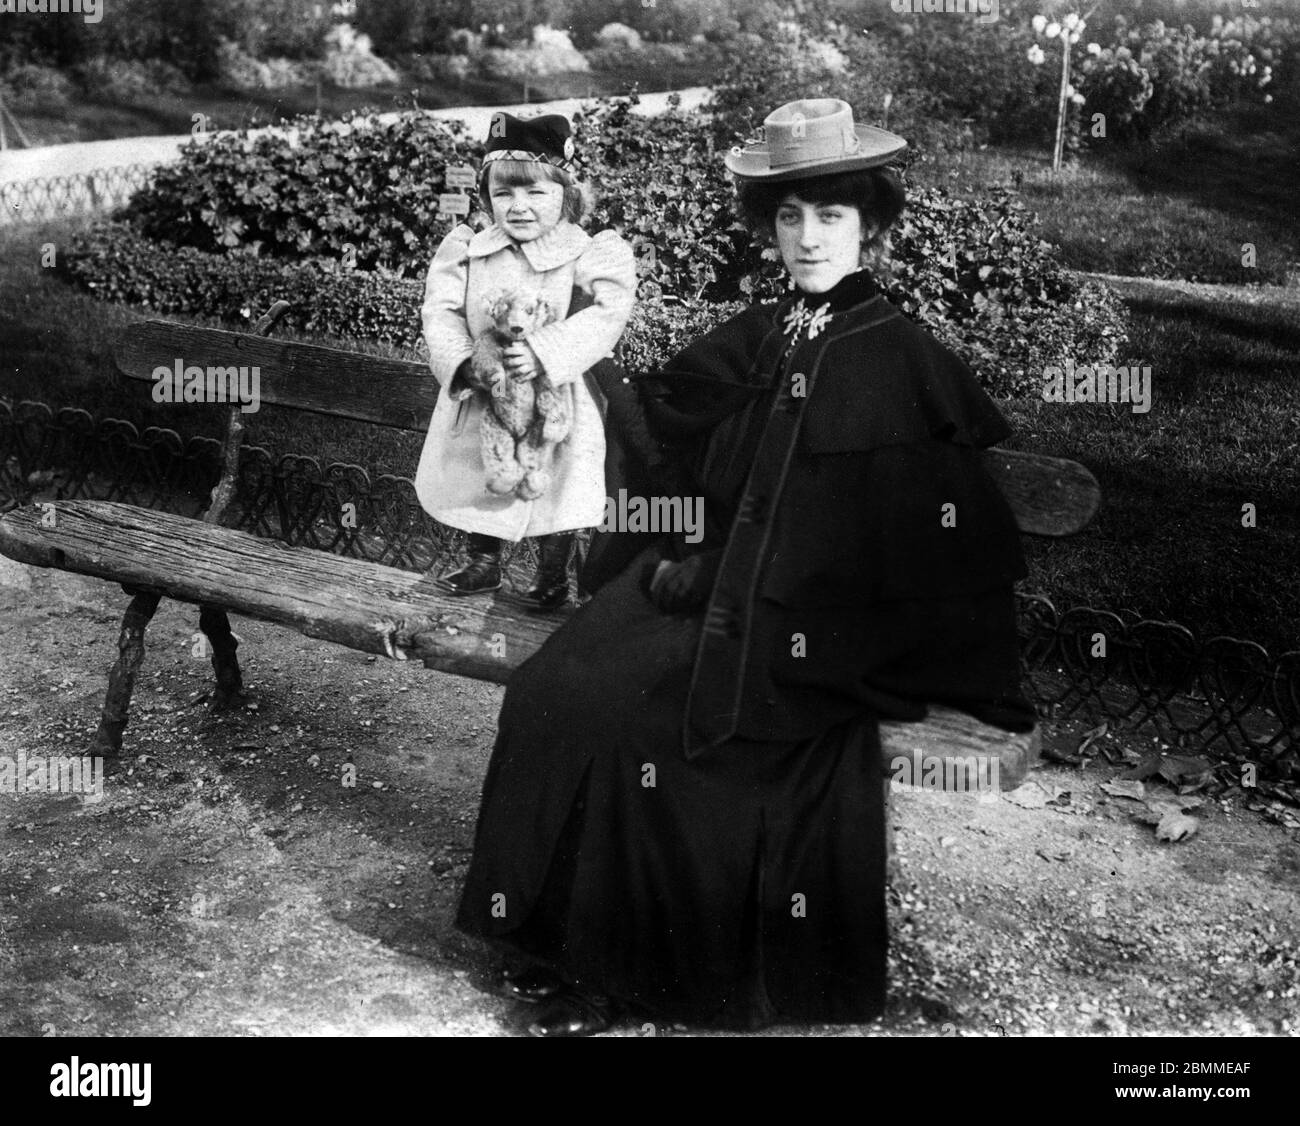 Belle epoque Black and White Stock Photos & Images - Alamy